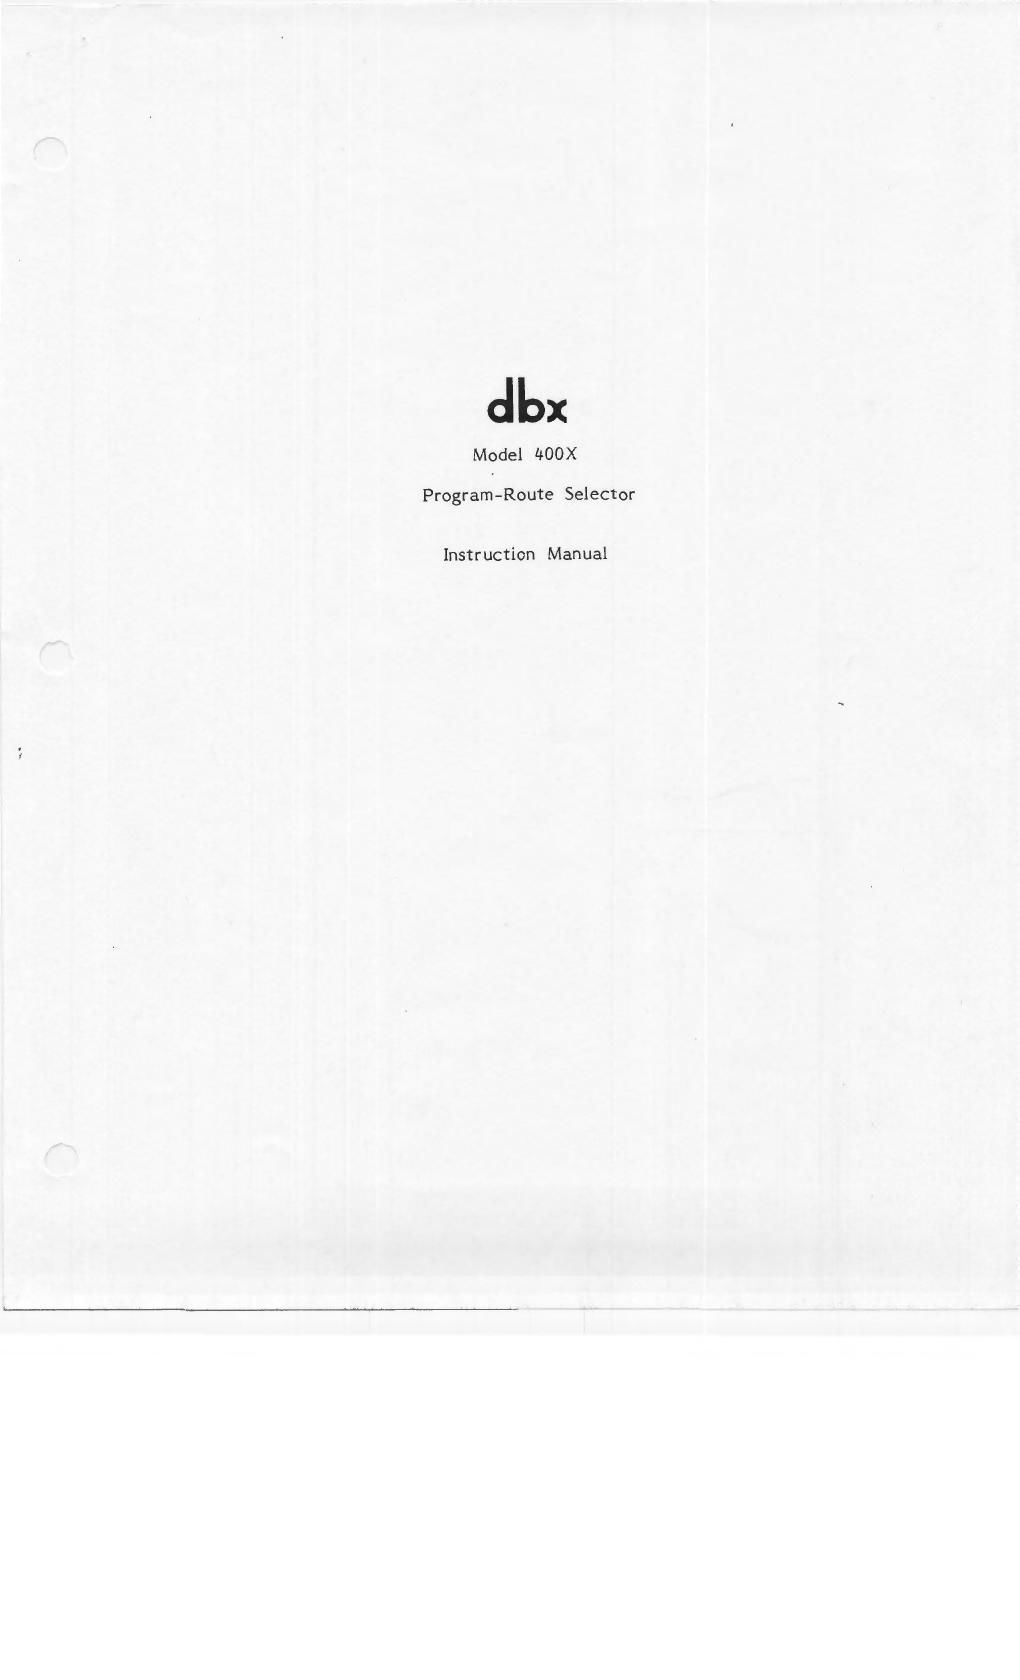 dbx 400 x owners manual